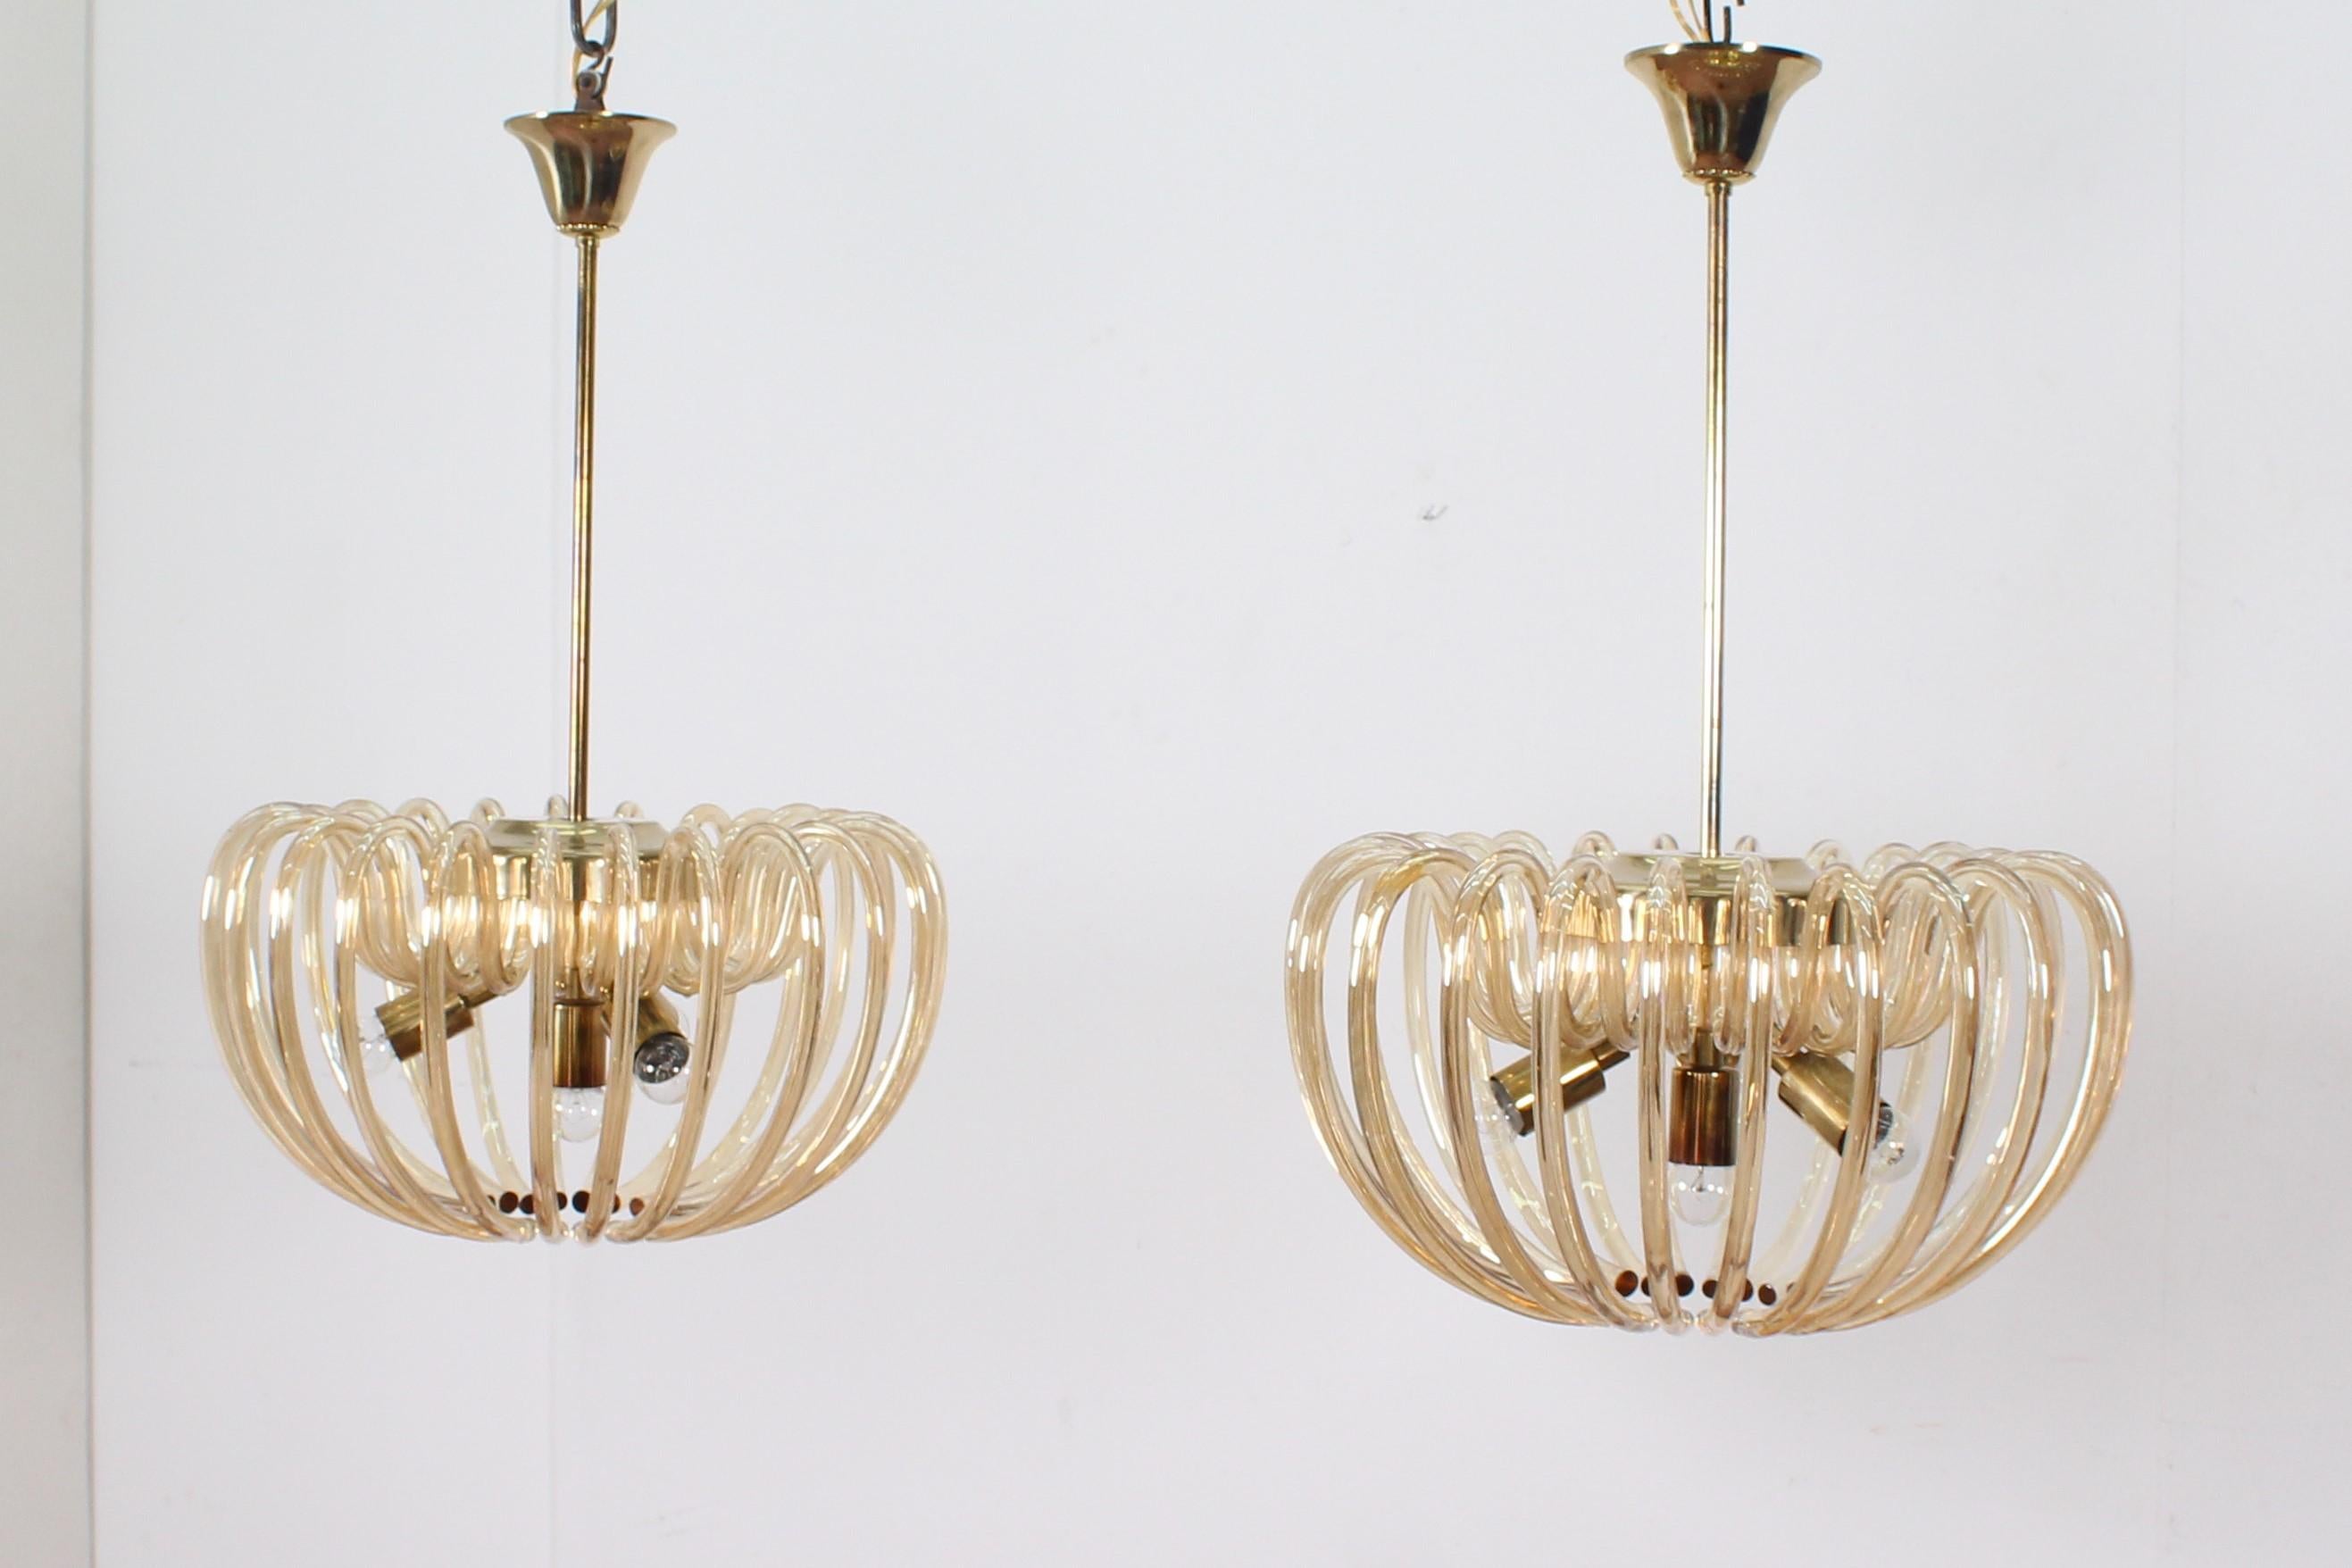 Pair of pendant chandeliers attributed to Venini, Murano, in brass and amber-colored curved crystal tubes. Italian production from the 1960s.
Wear consistent with age and use.